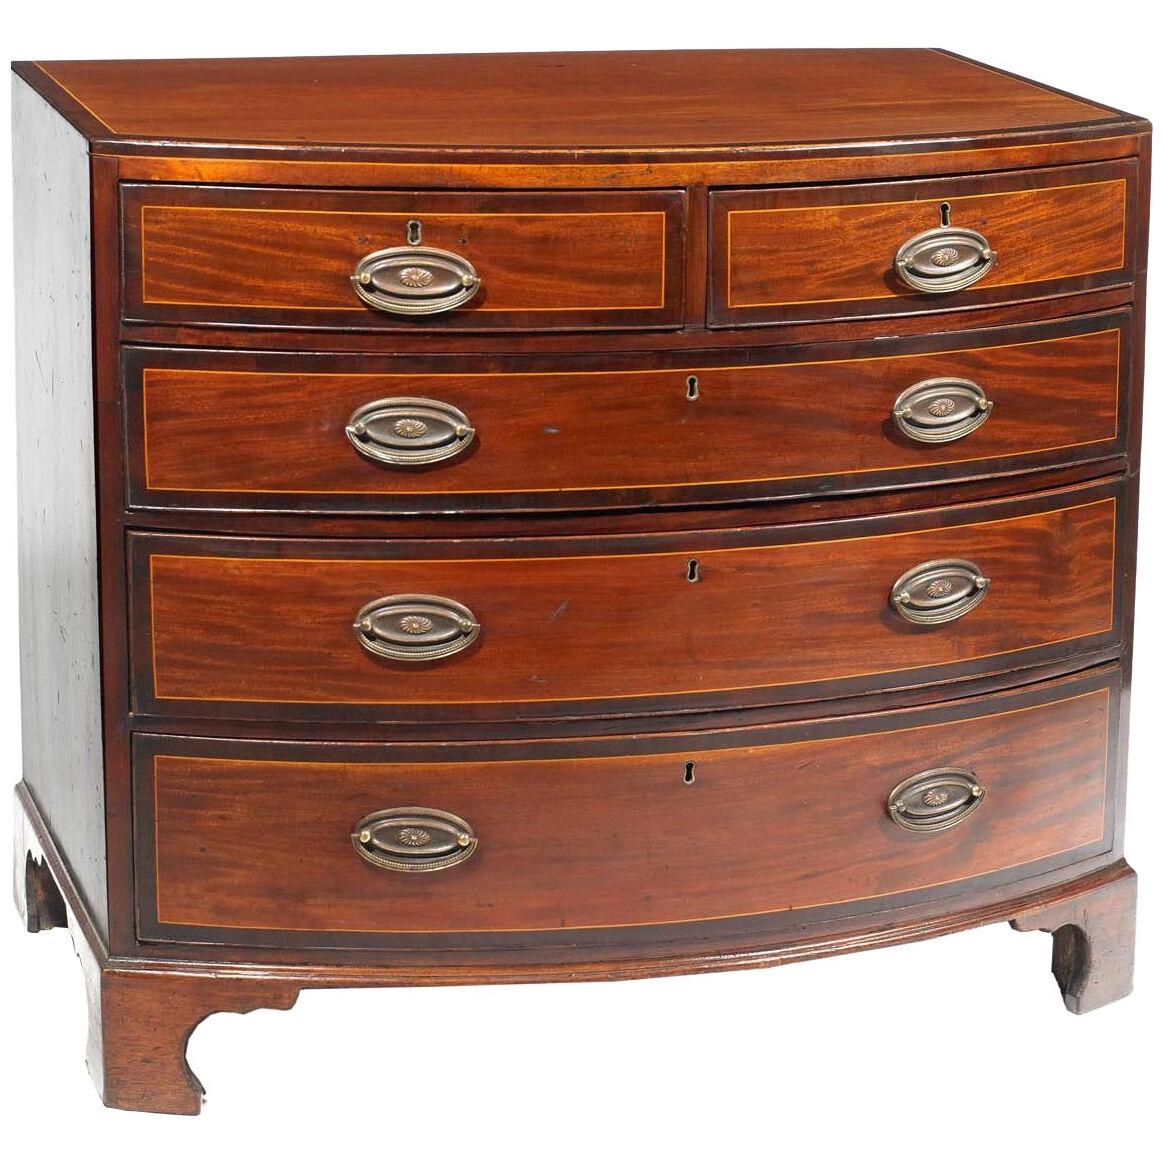 Early 19th Century Bowfront Chest of Drawers after Thomas Sheraton